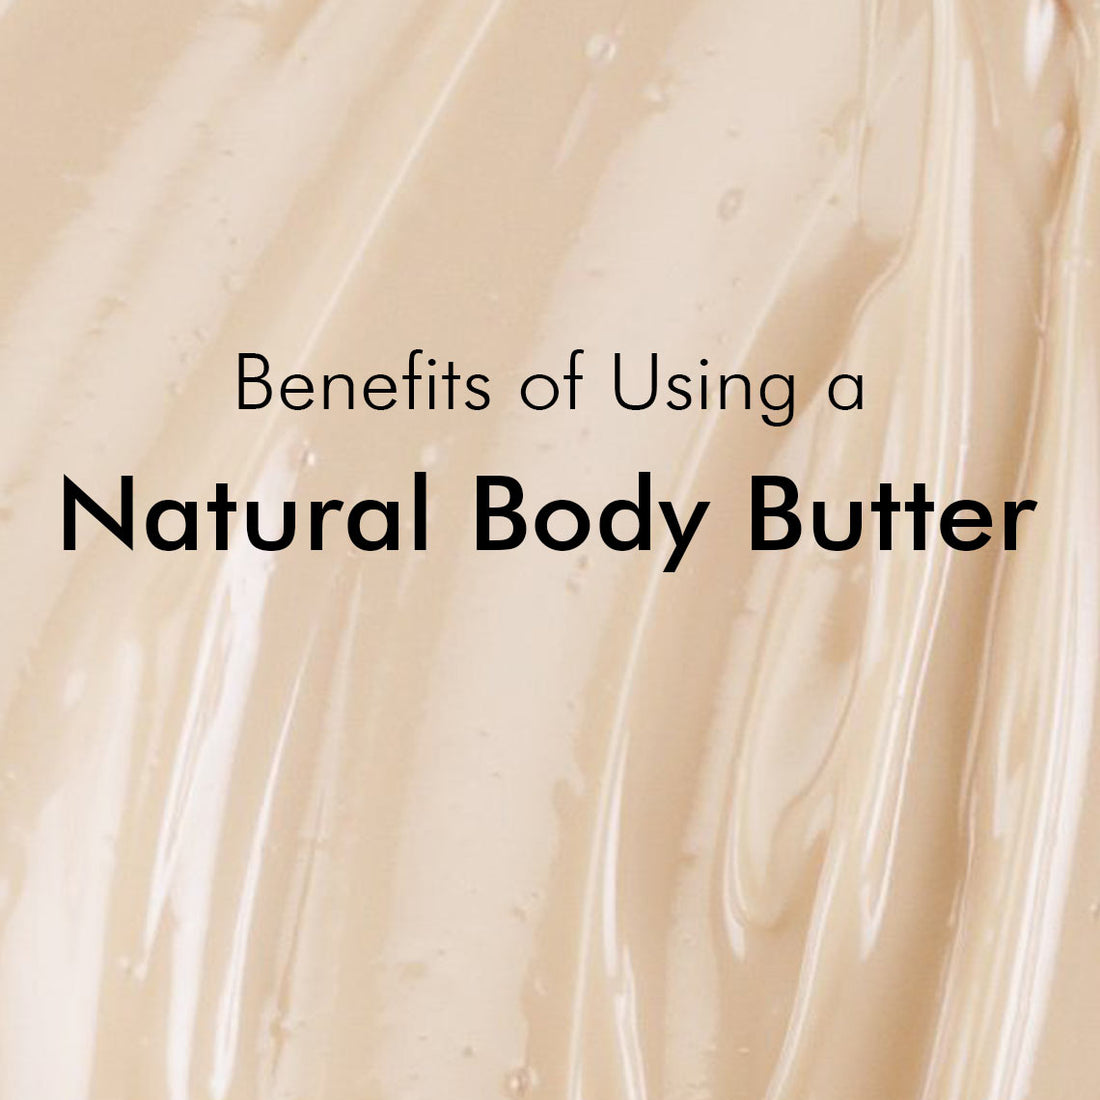 7 Benefits of Using a Natural Body Butter